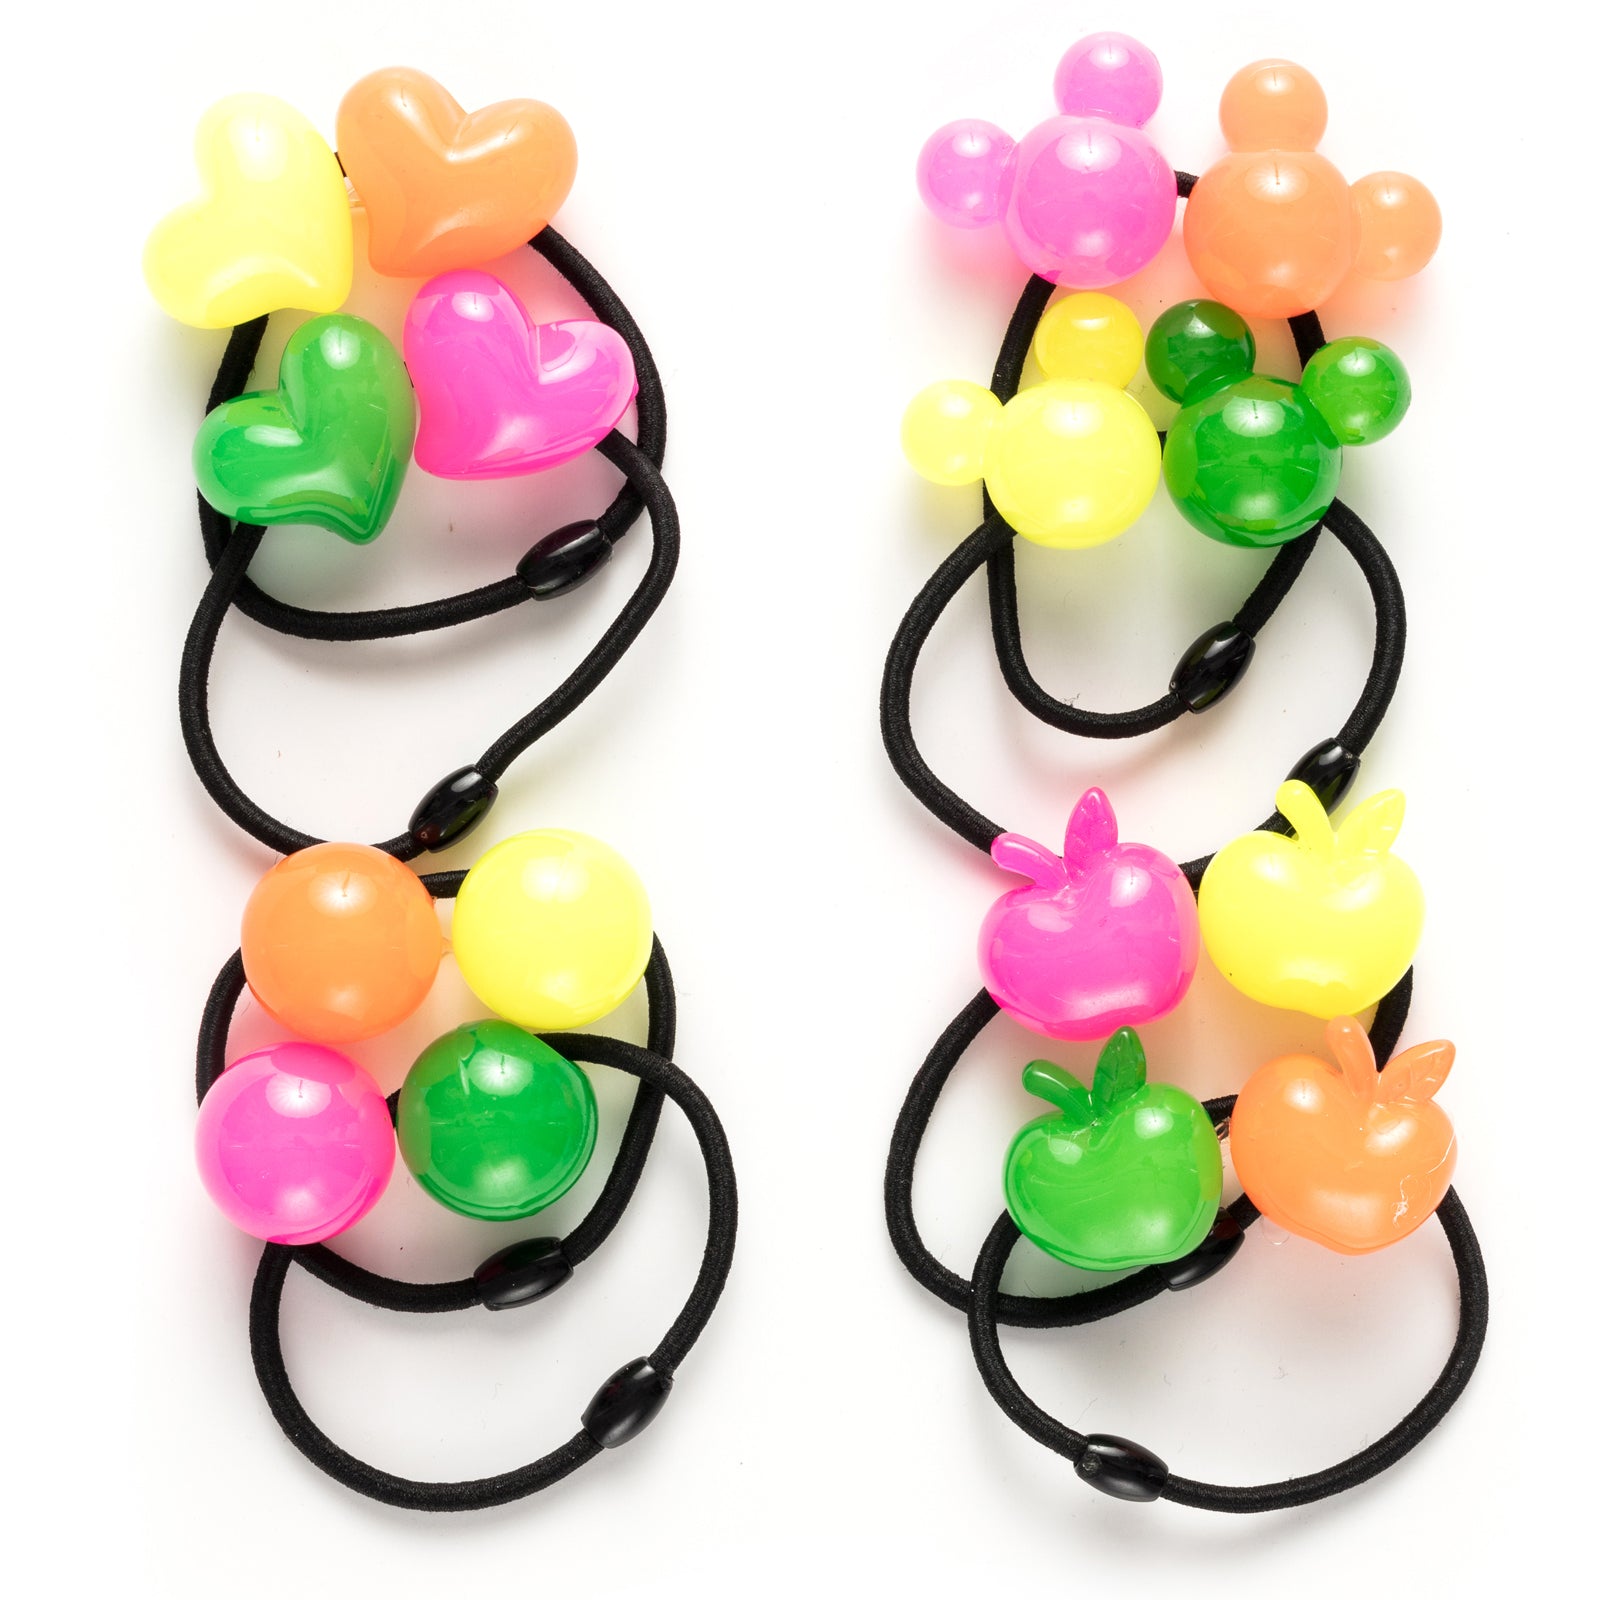 Hearts, Mickeys, Apples and Spheres shiny bauble hair tie